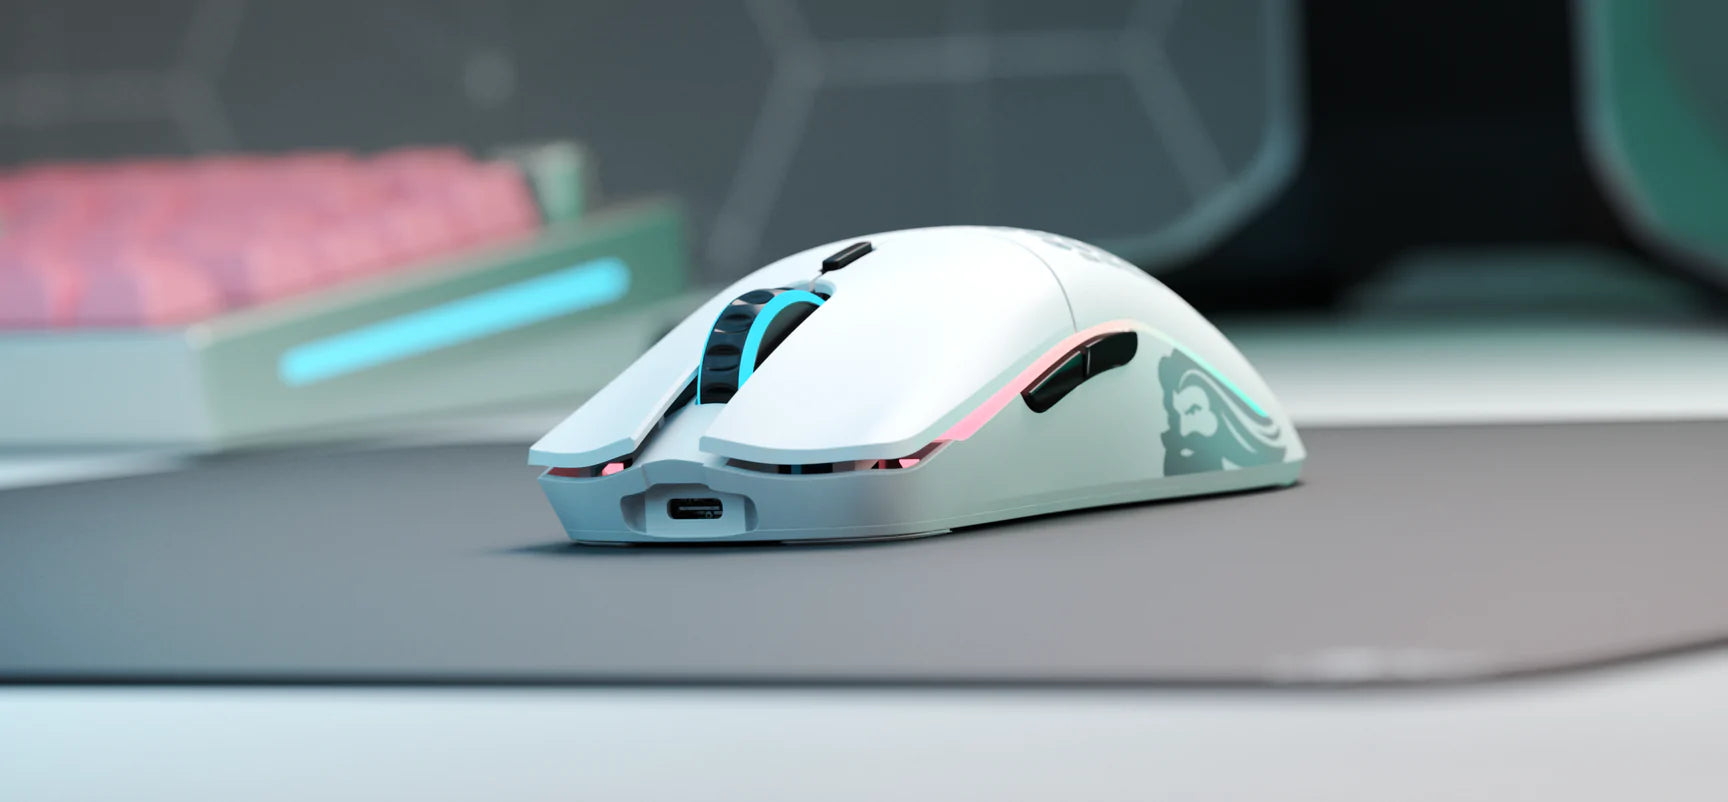 A large marketing image providing additional information about the product Glorious Model O Minus Ambidextrous Wireless Gaming Mouse - Matte White - Additional alt info not provided